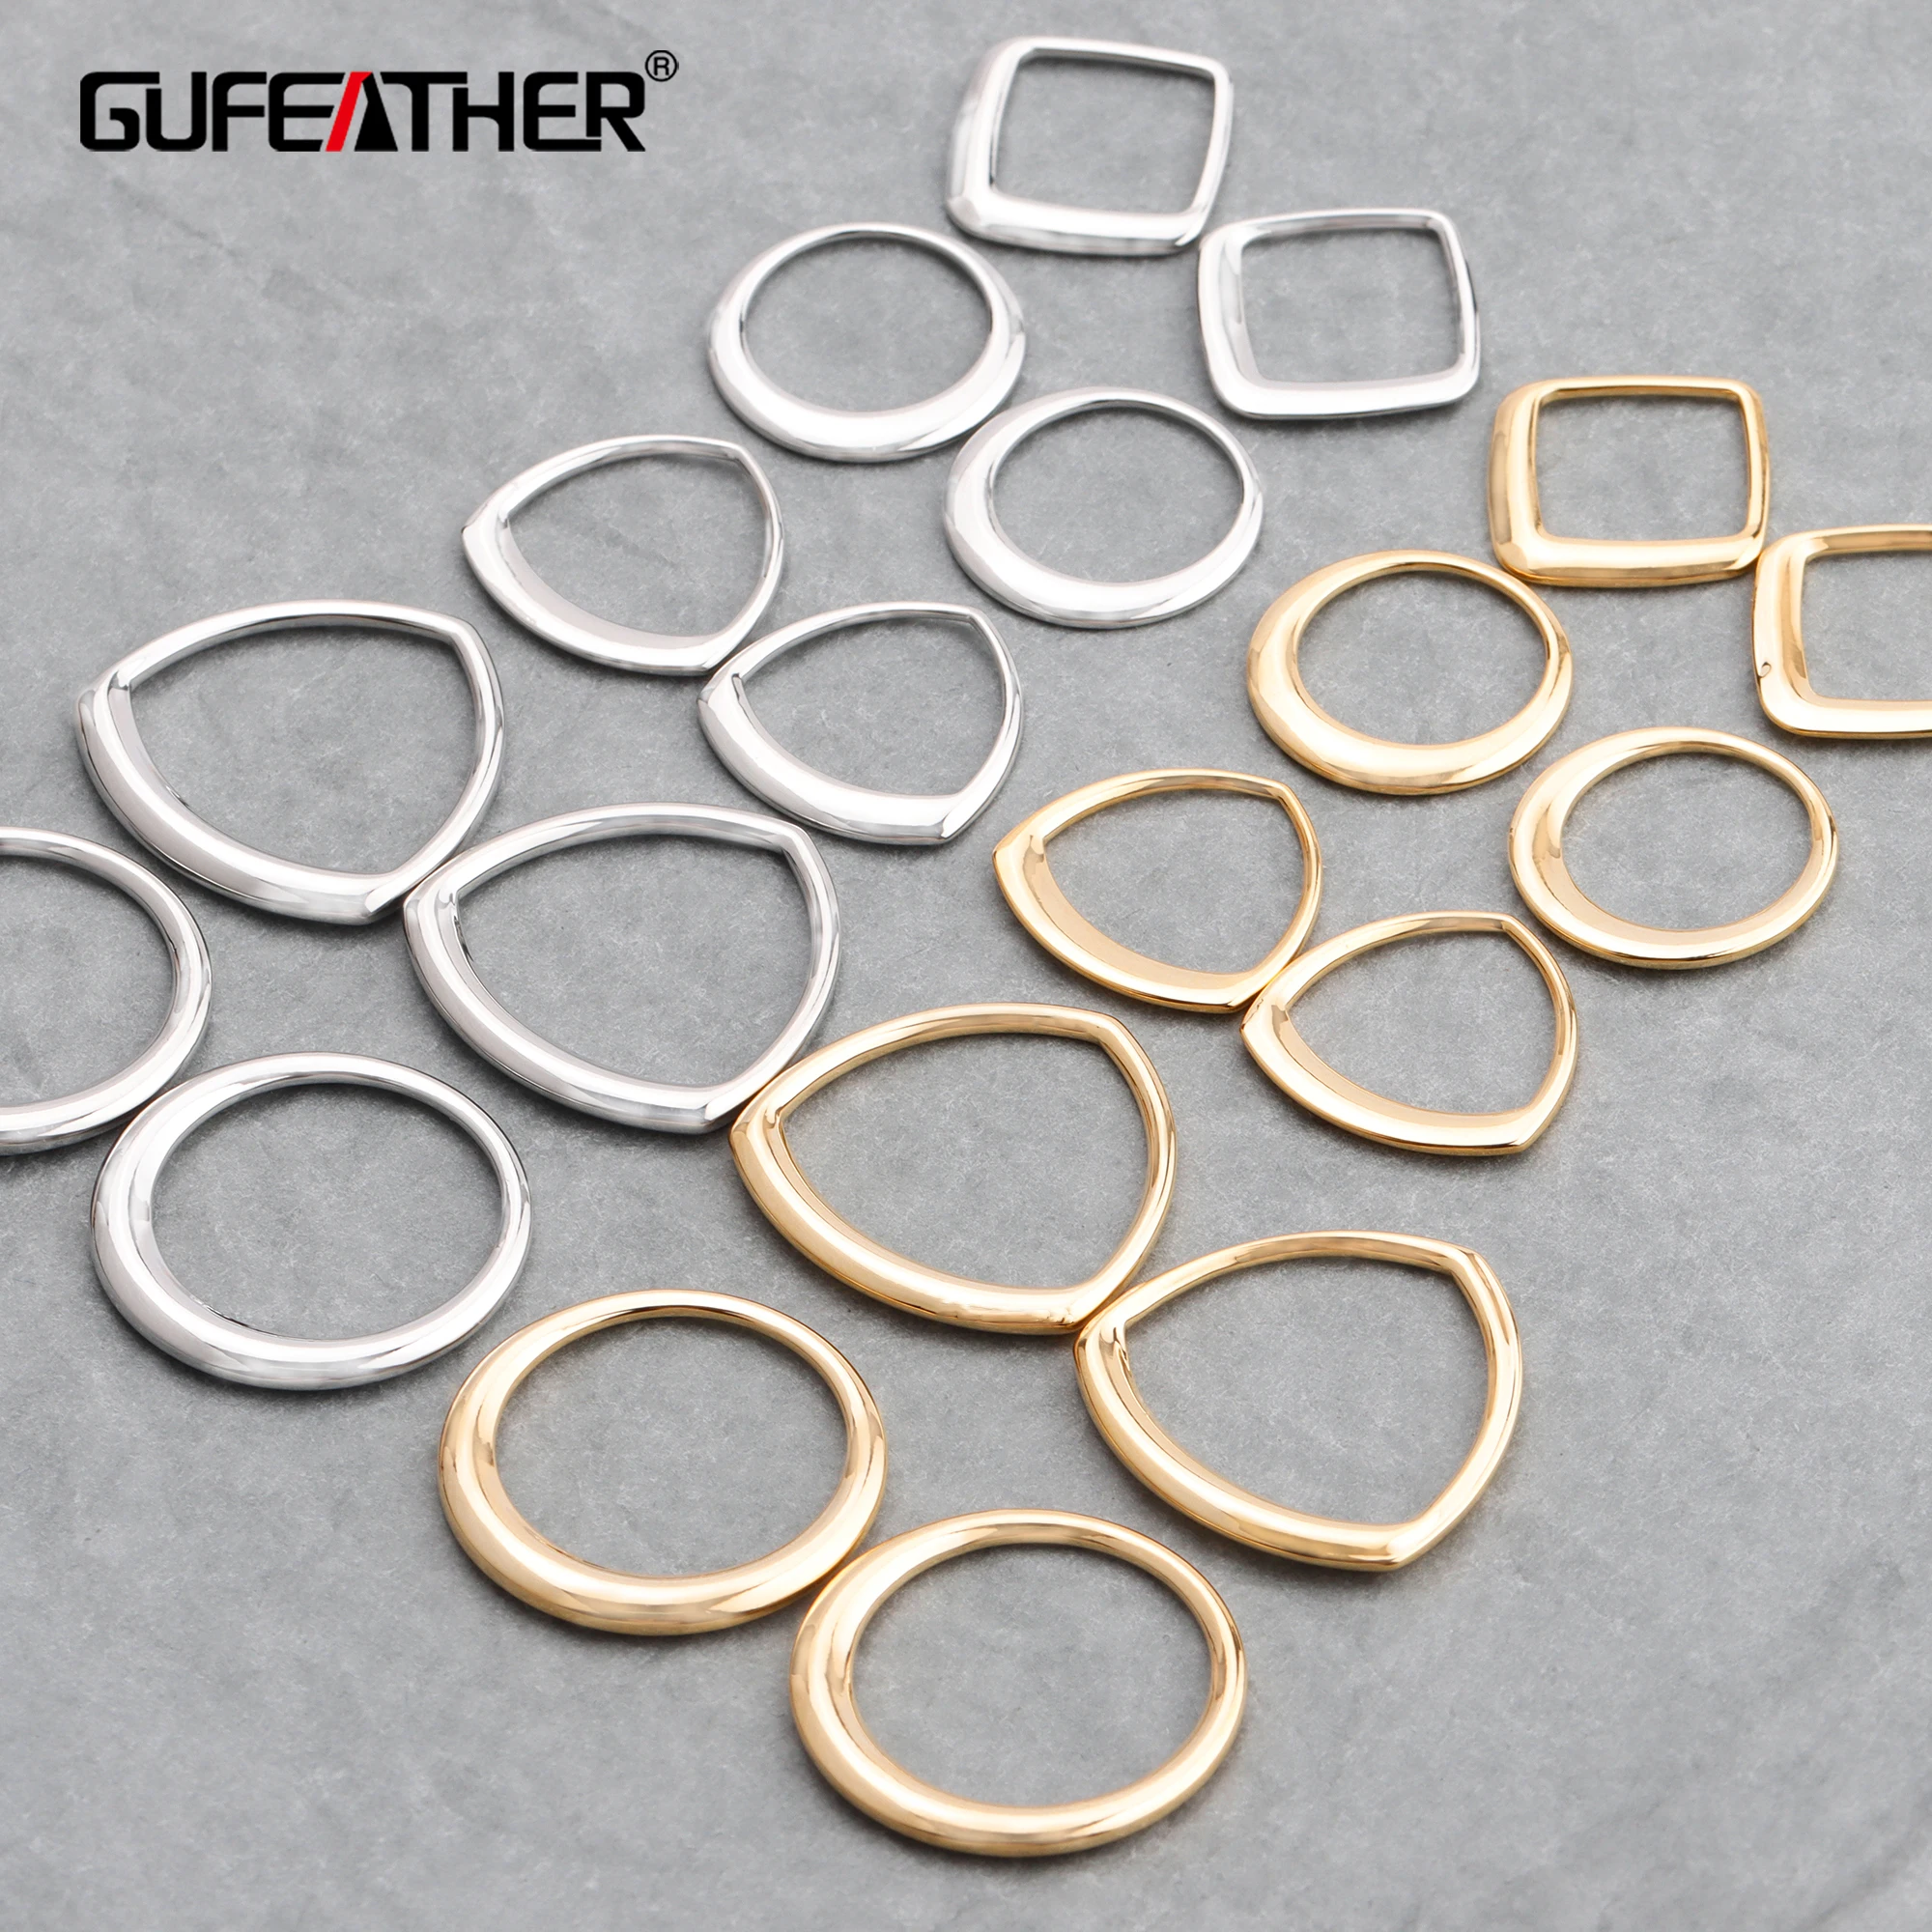 

GUFEATHER M714,jewelry accessories,18k gold rhodium plated,connector,copper metal,pass REACH,nickel free,diy earrings,20pcs/lot